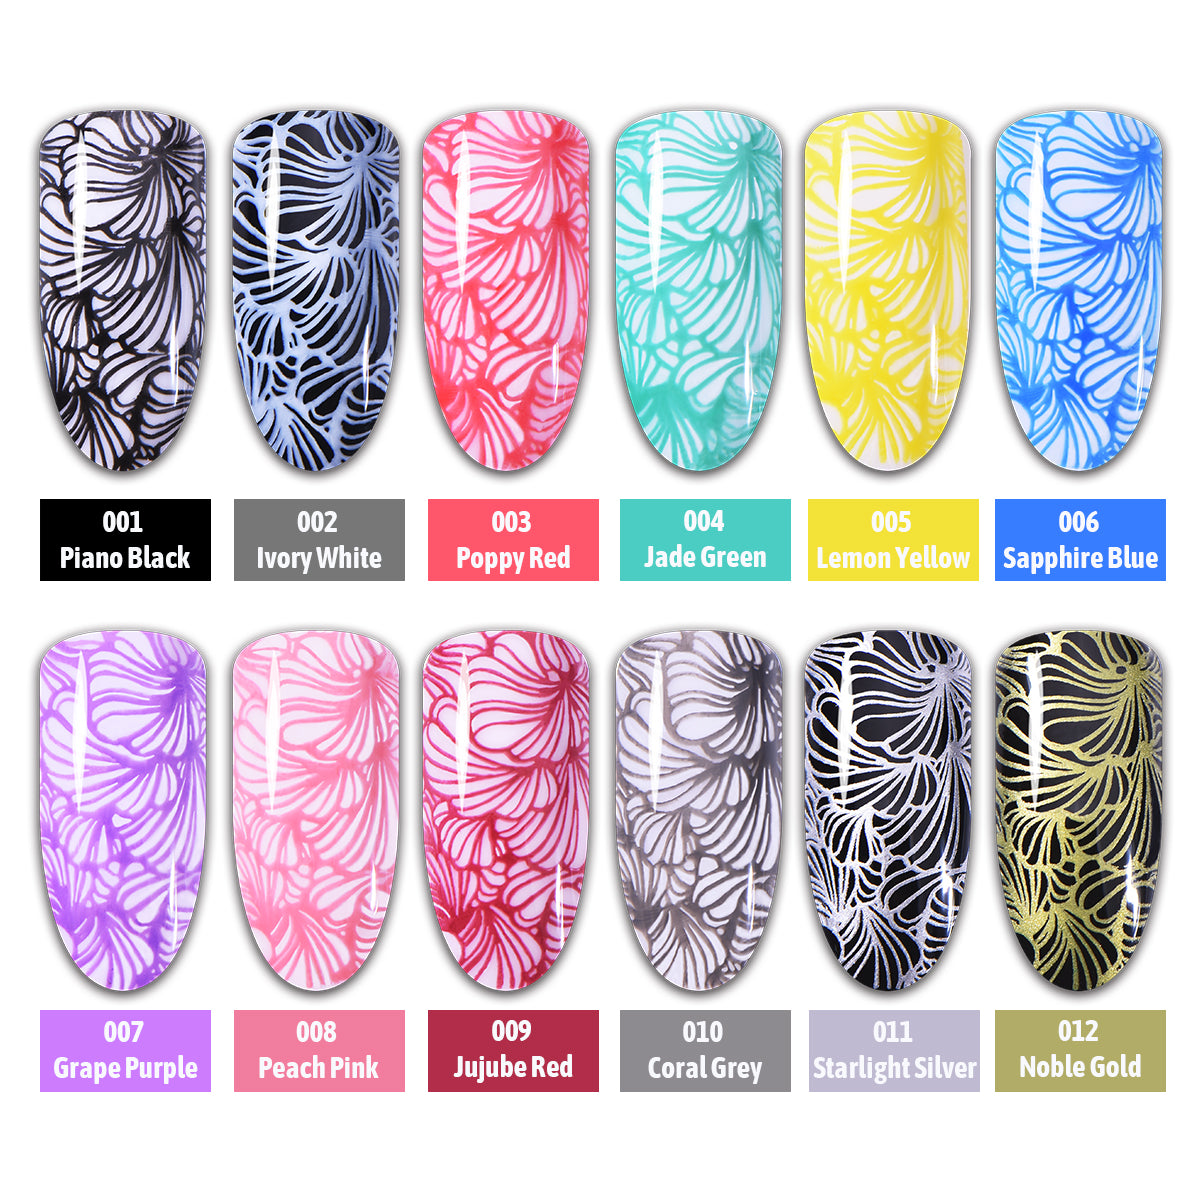 8ML Nail Stamping UV Gel Polish Lacquer Soak Off Varnish For Manicure ...